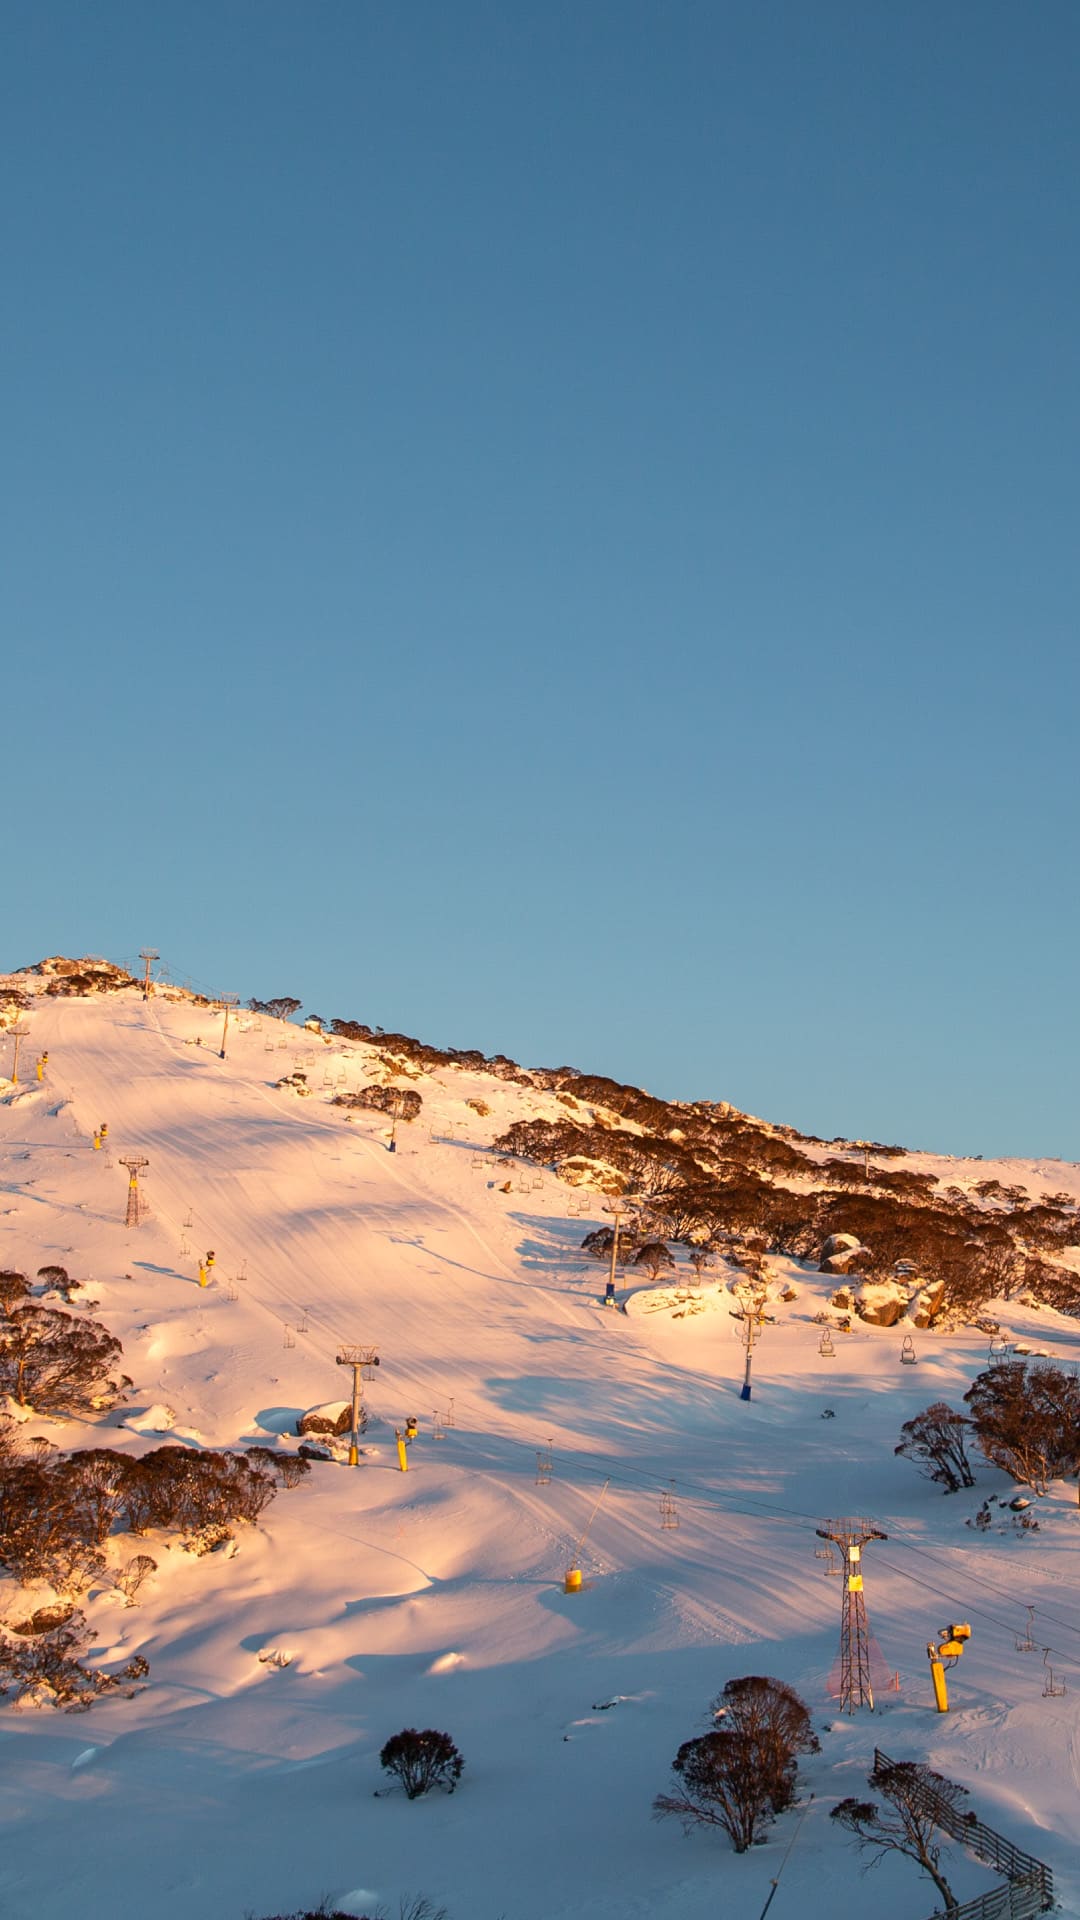 Access to Thredbo and Persher ski resorts is less than 40 minutes